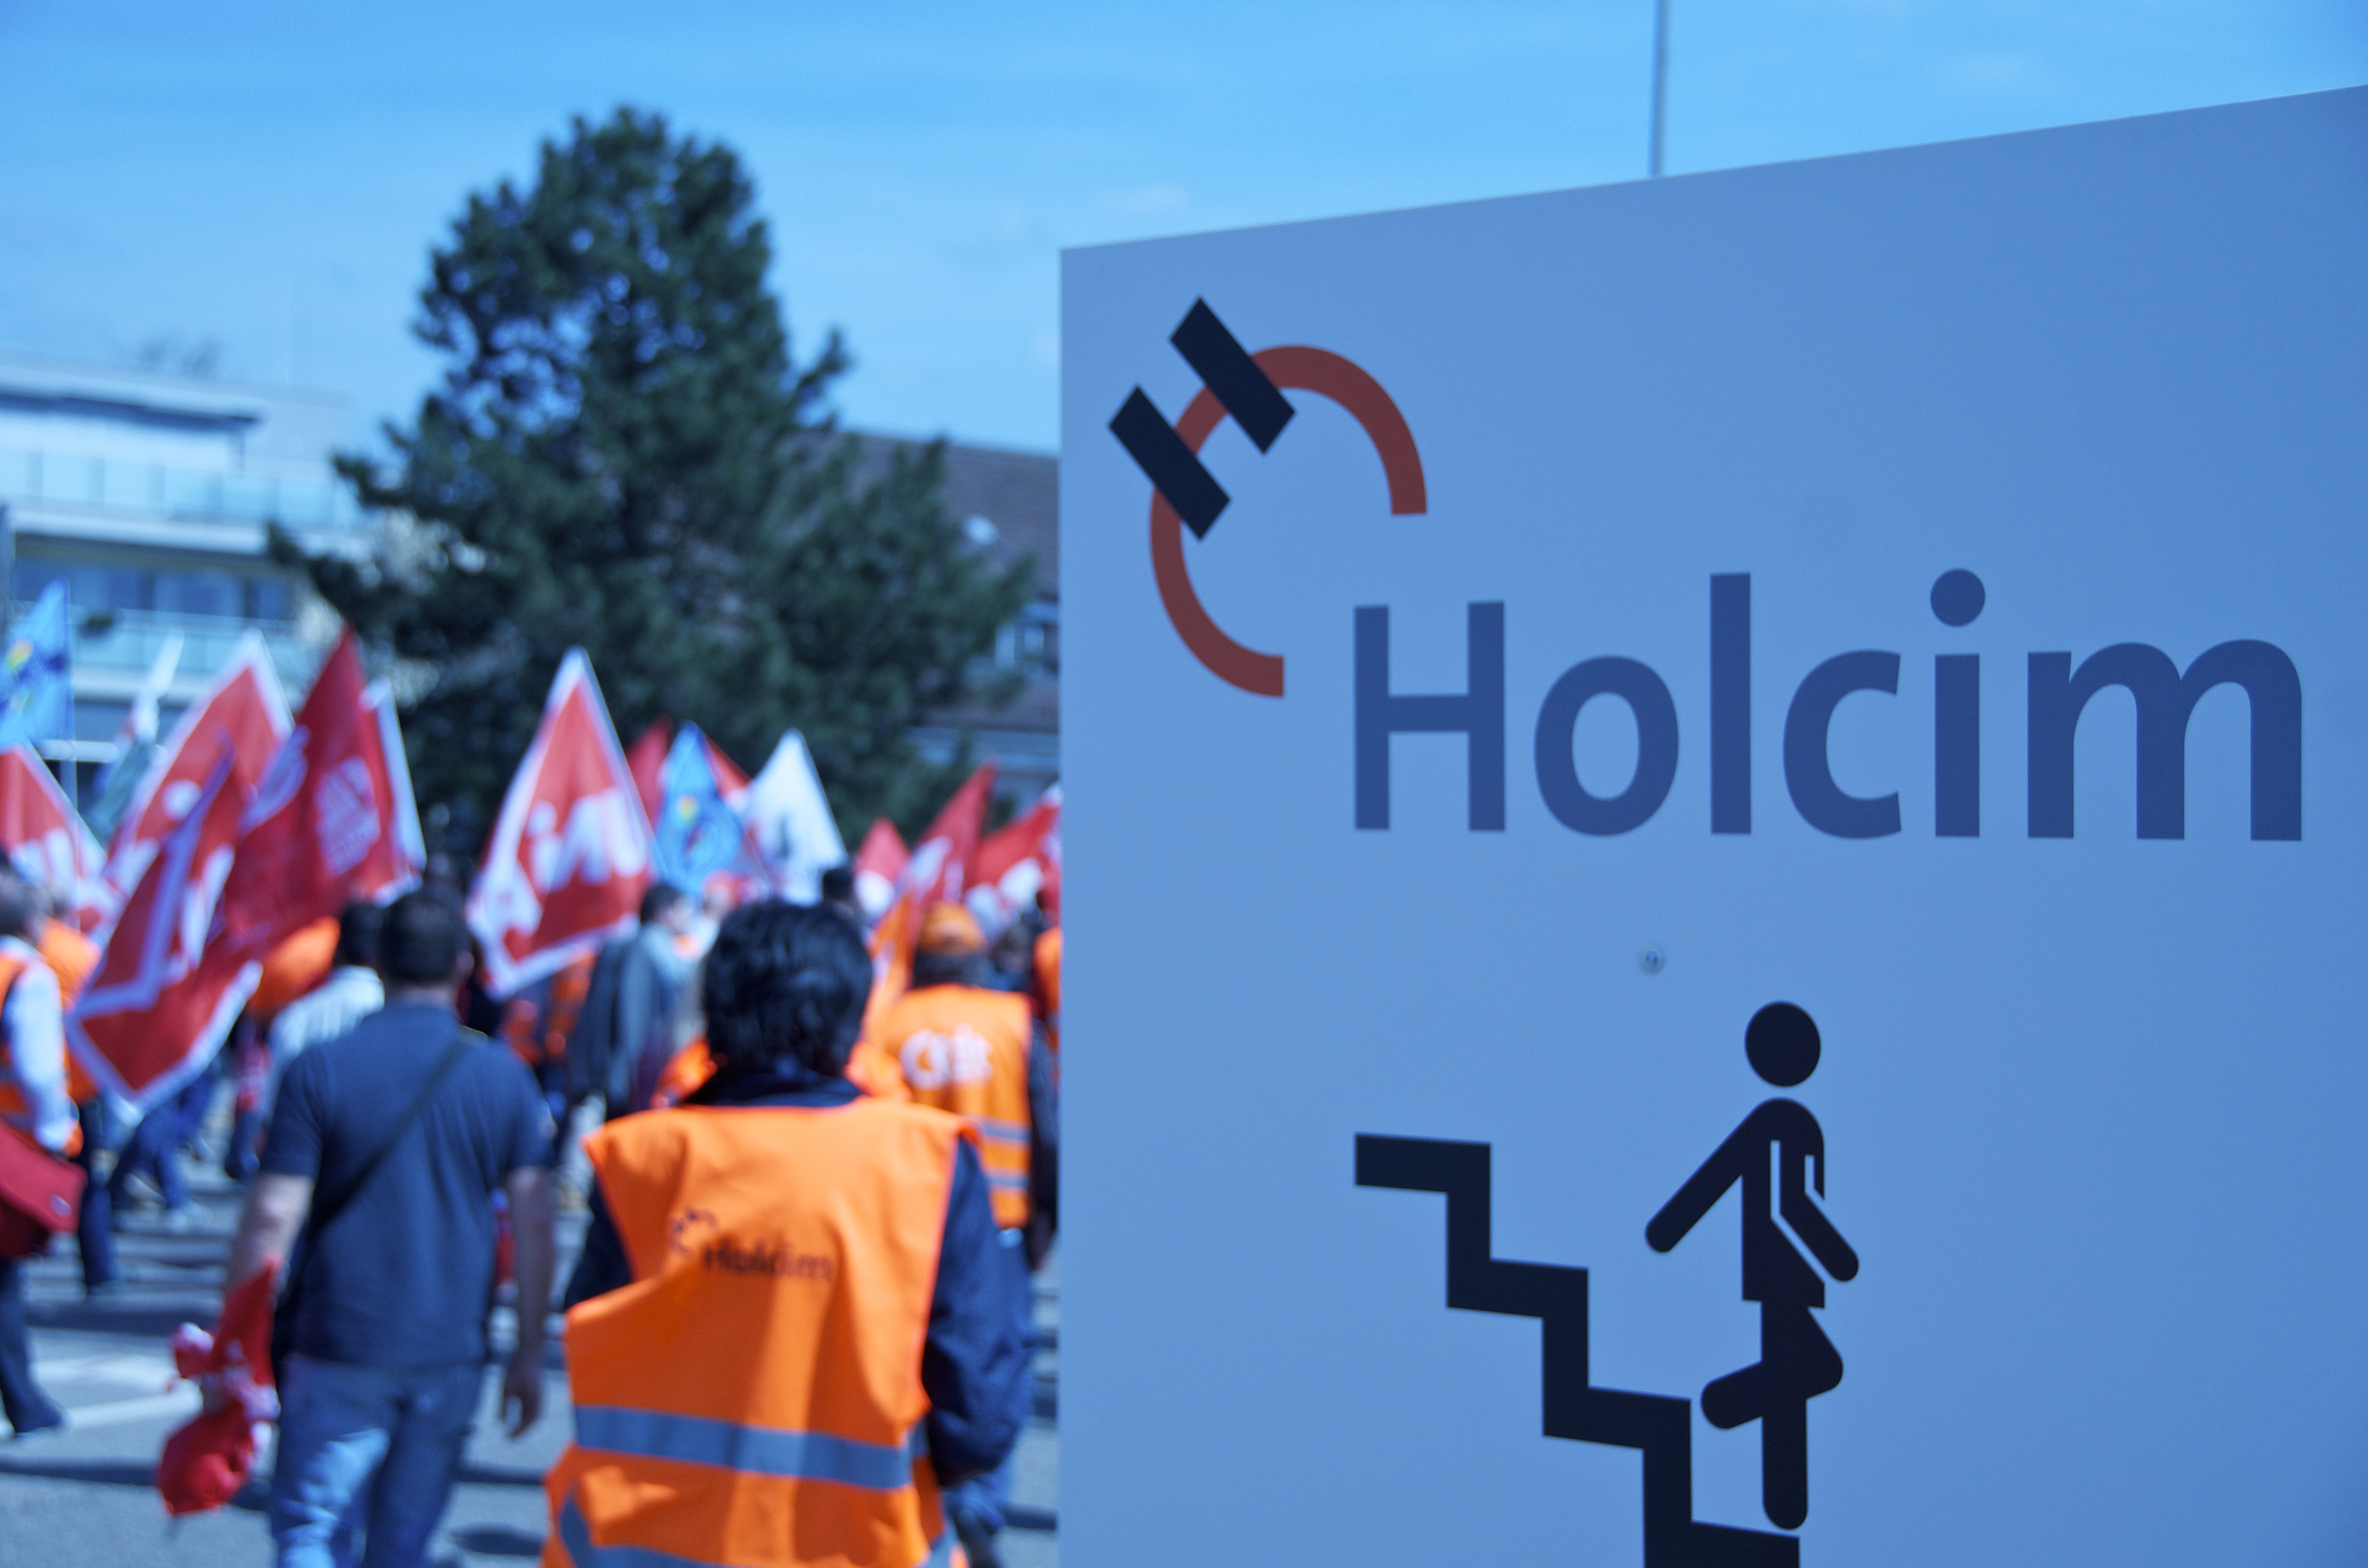 Over 200 workers protest at Holcim’s AGM | IndustriALL